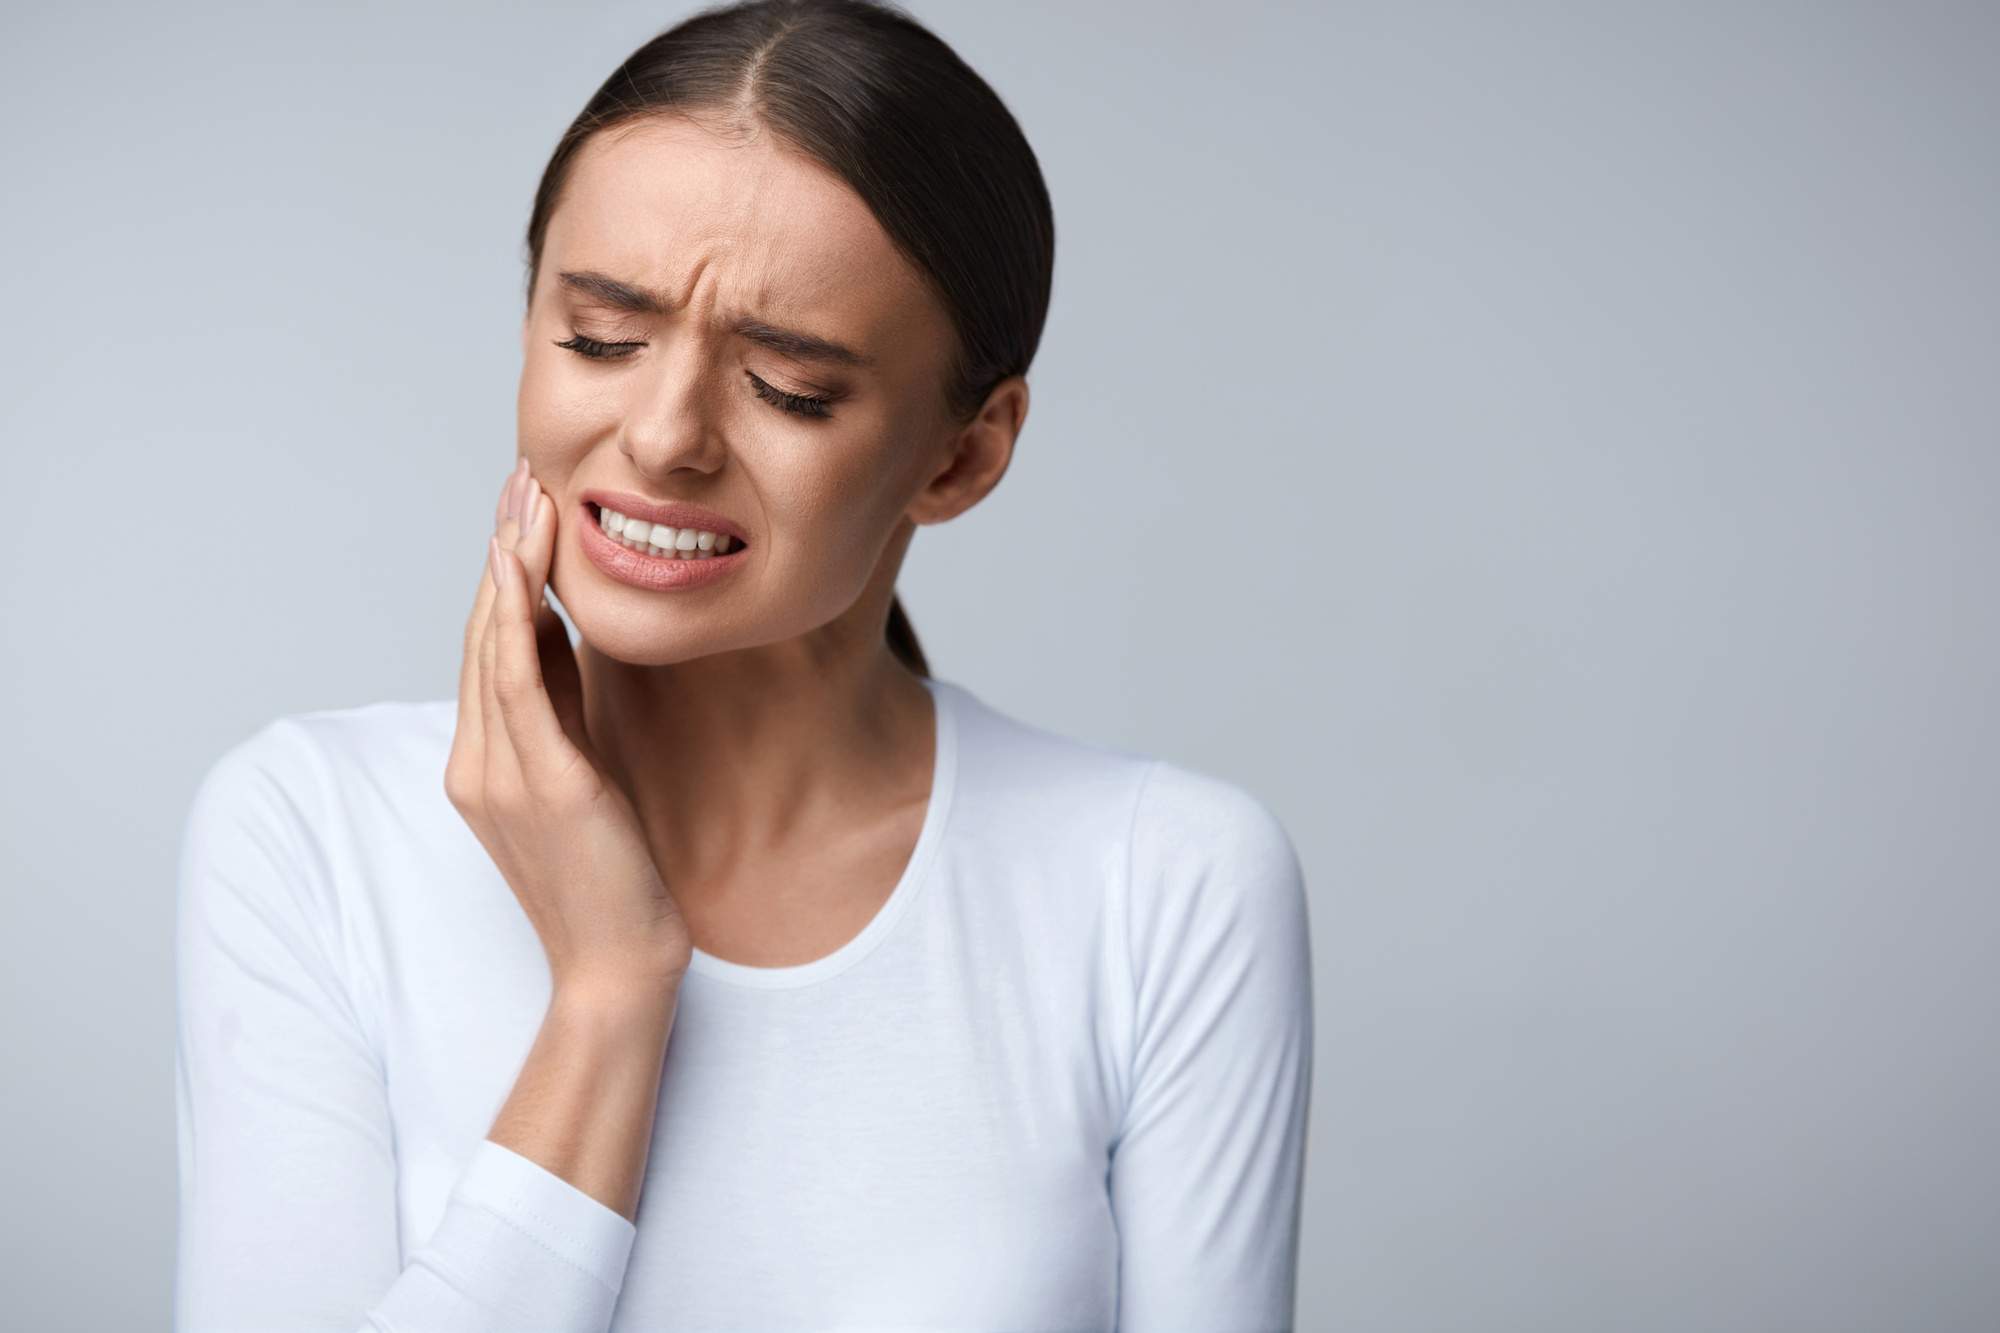 How to Manage a Toothache at Night Before Your Dental Appointment